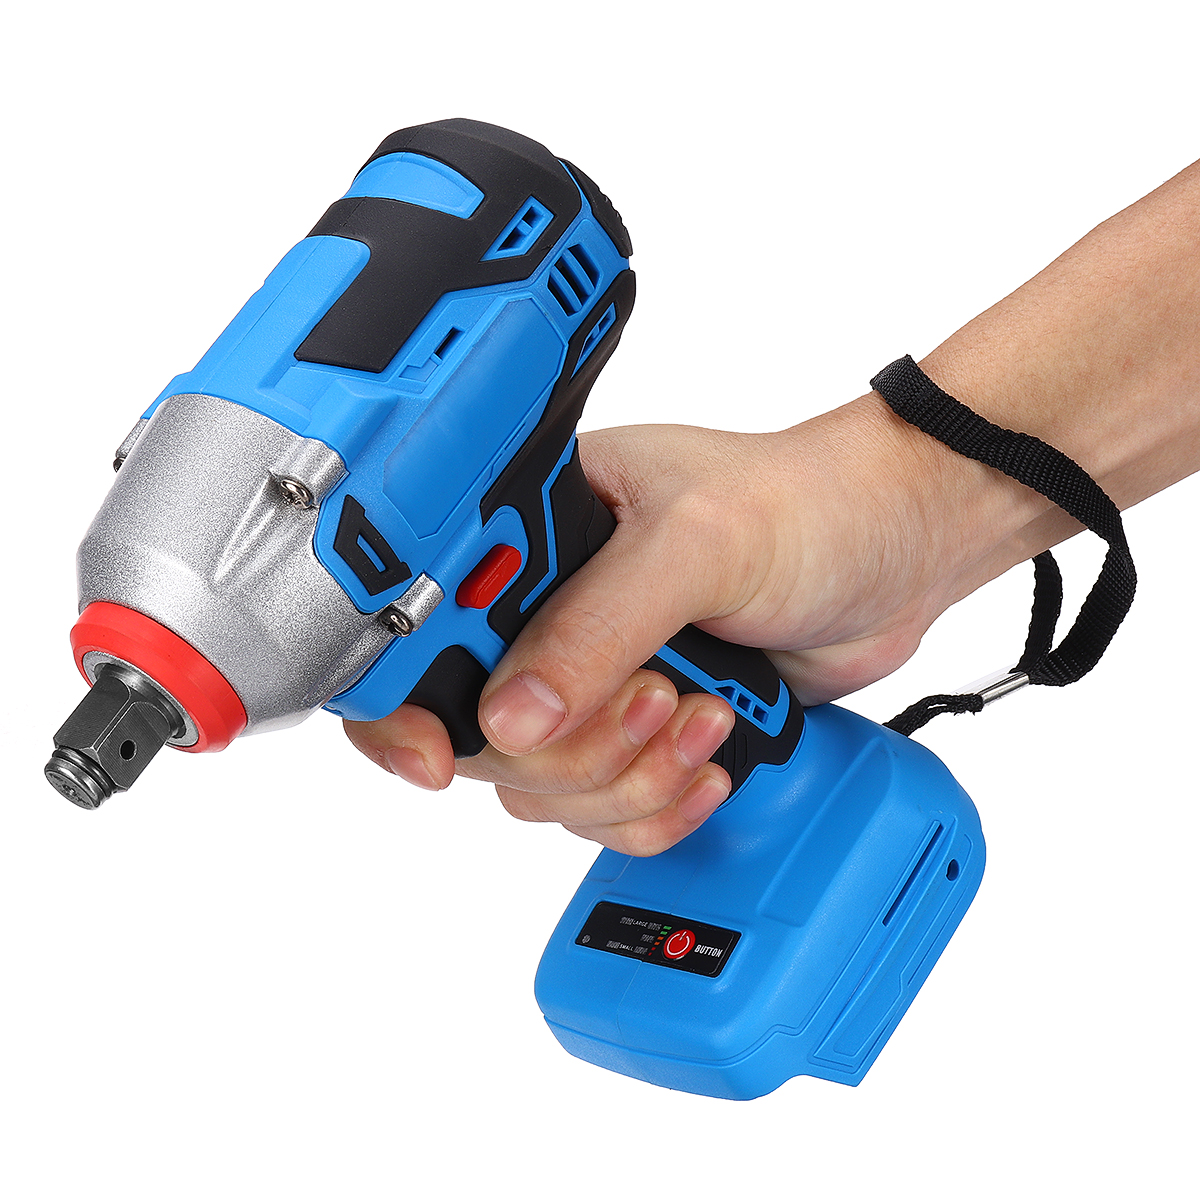 350Nm-Cordless-Brushless-Impact-Wrench-Fit-Makita-Lithoum-Battery-Type-Electric-Wrench-Tool-Only-1889963-8